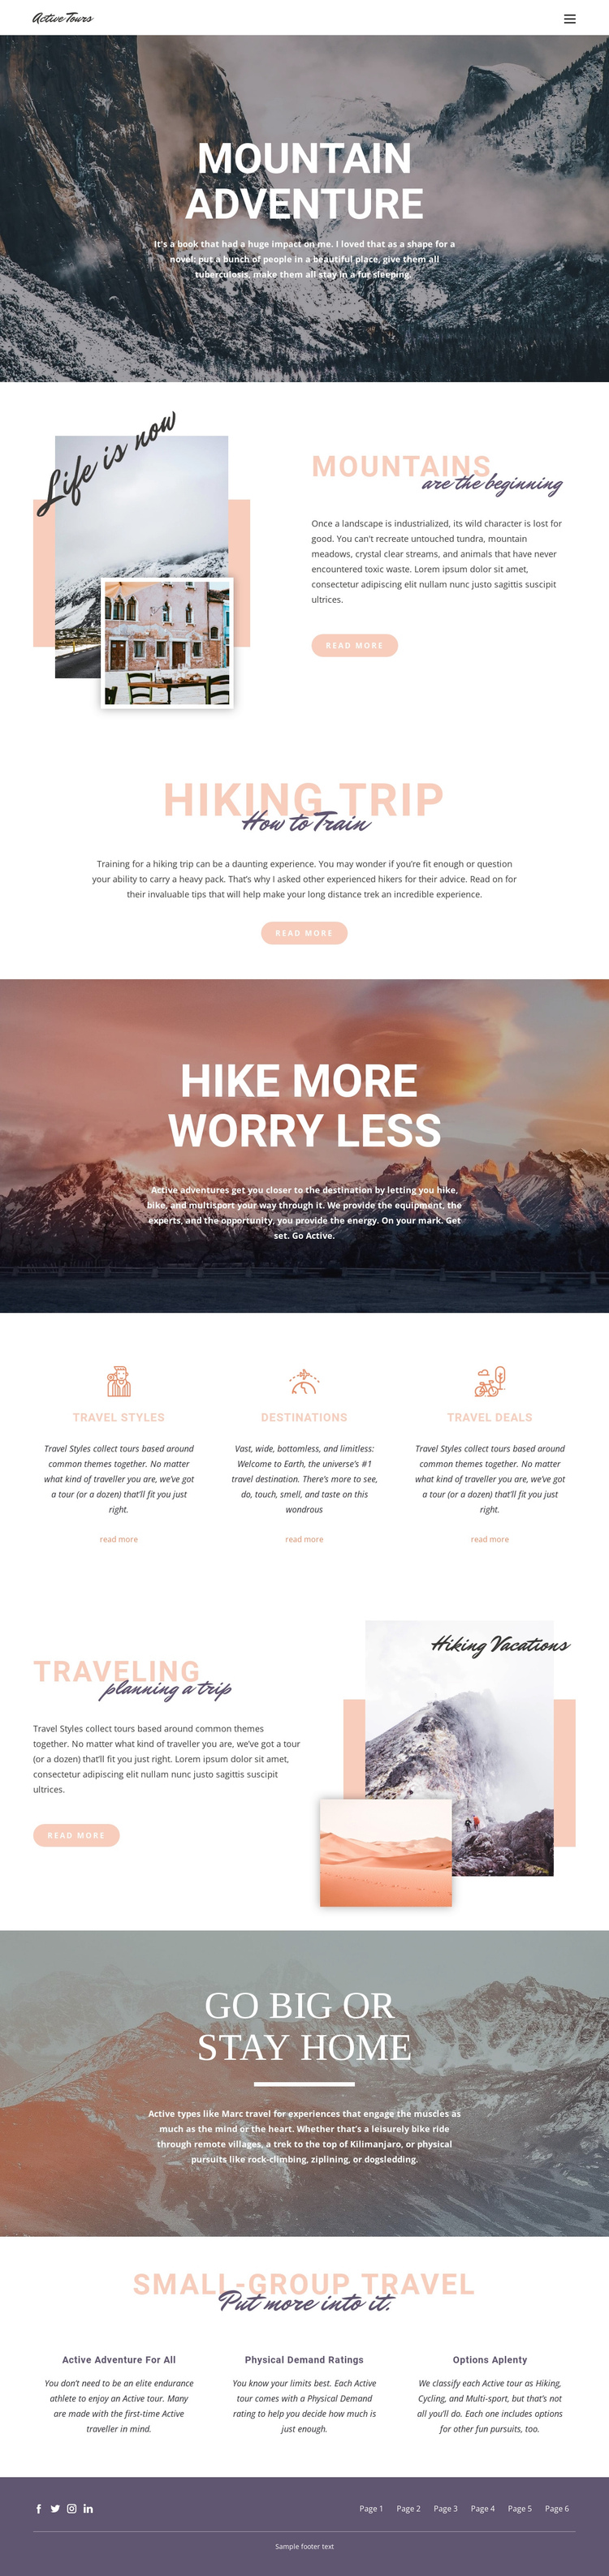 Guided backpacking trips Website Builder Software